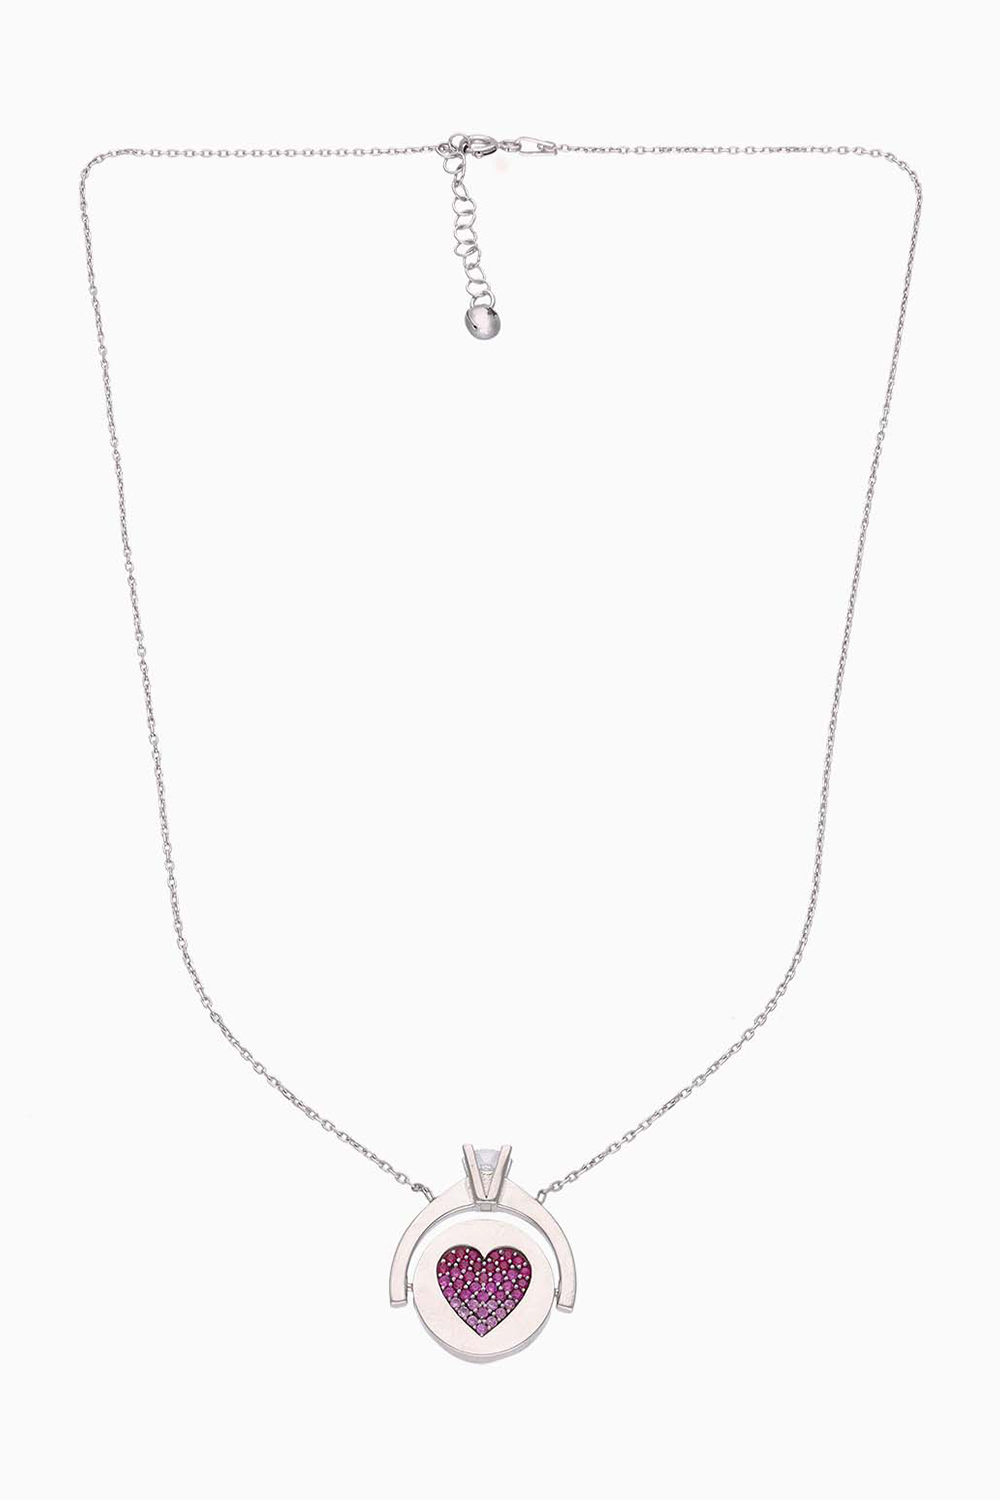 A Beautiful Ode Of Love Casual Silver Chain Necklace